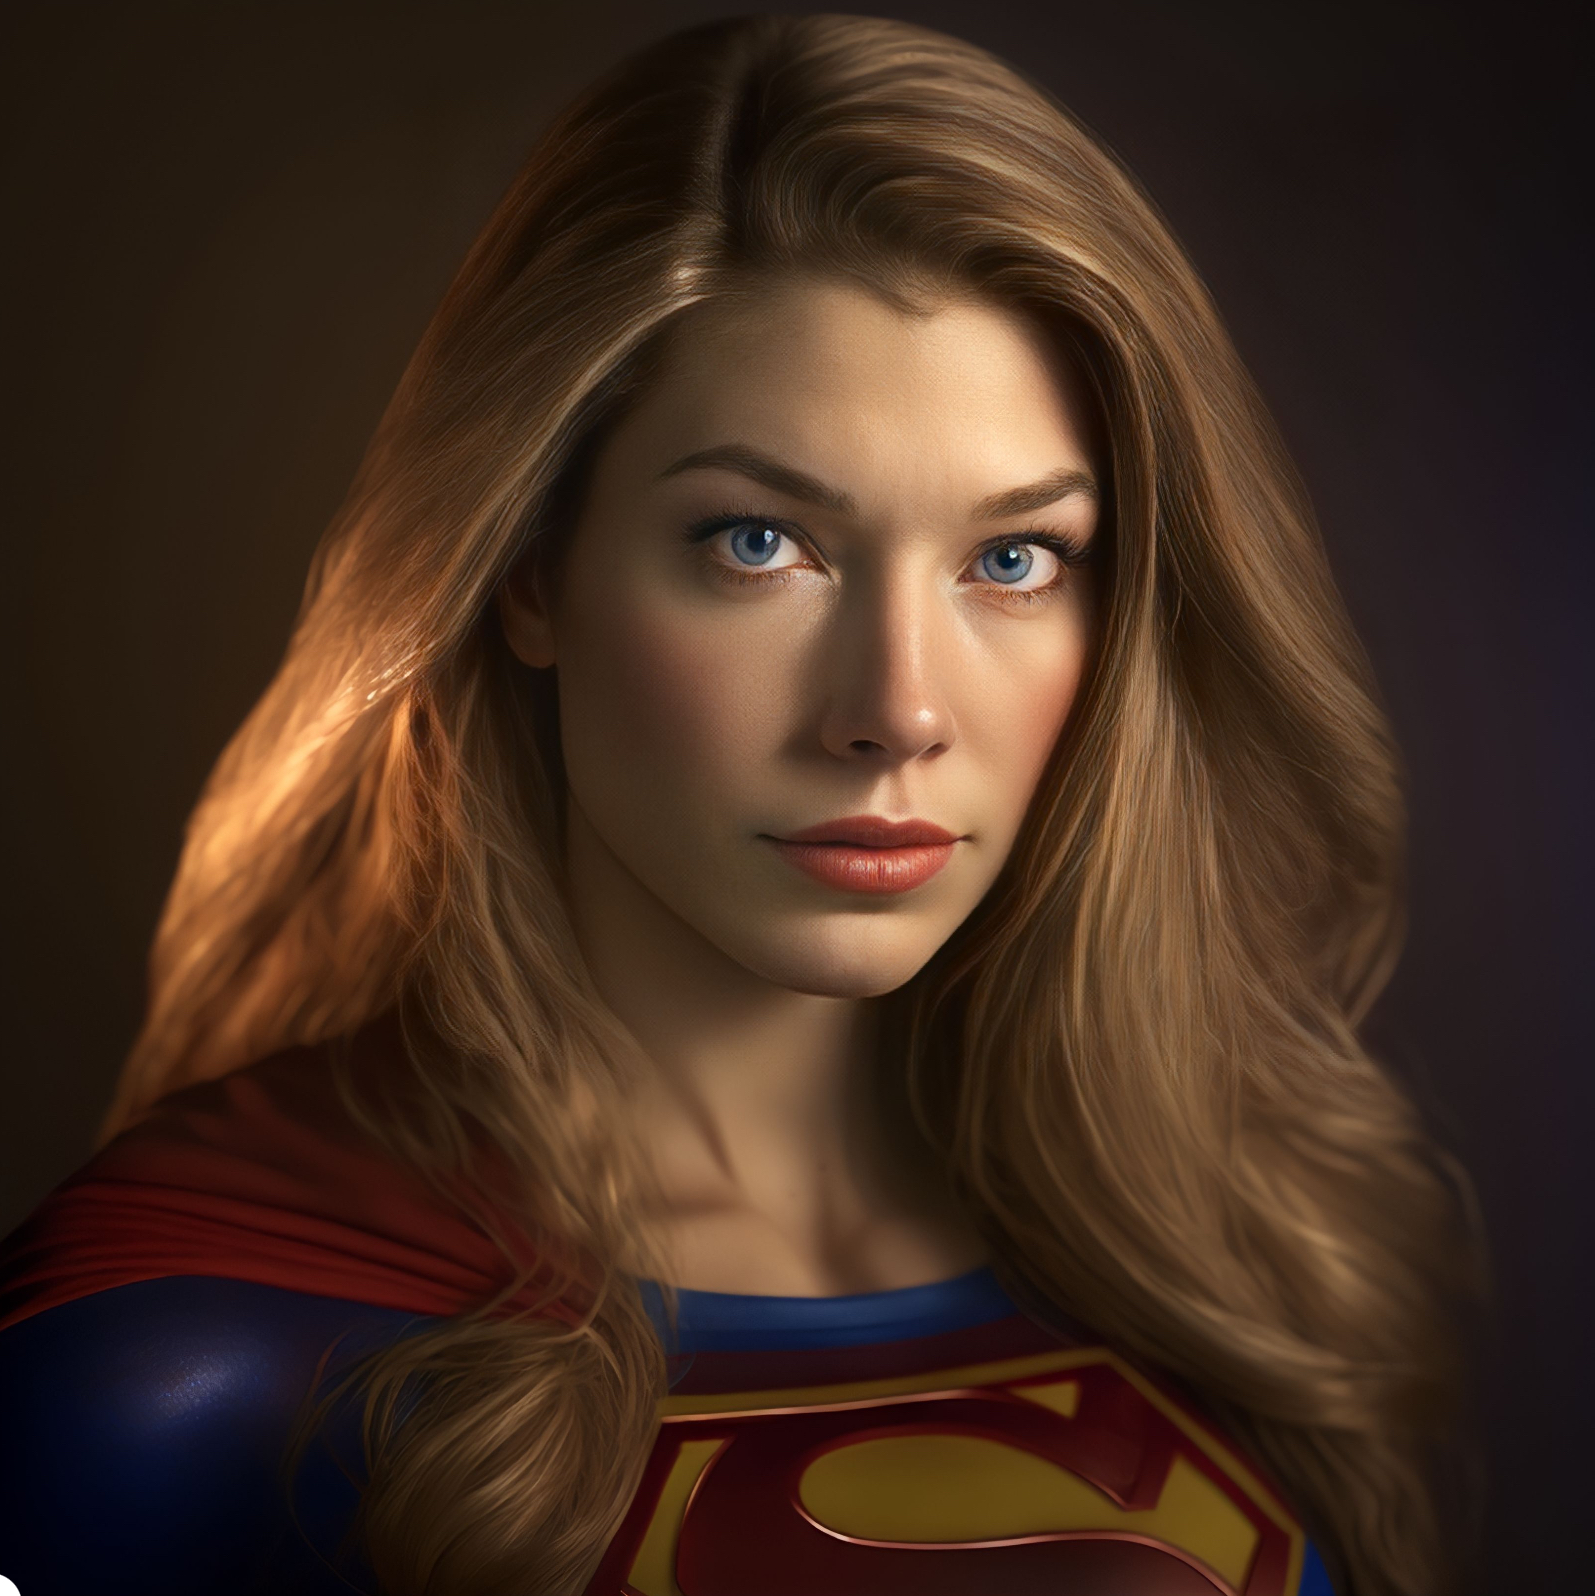 Supergirl Wallpaper For Android - carrotapp